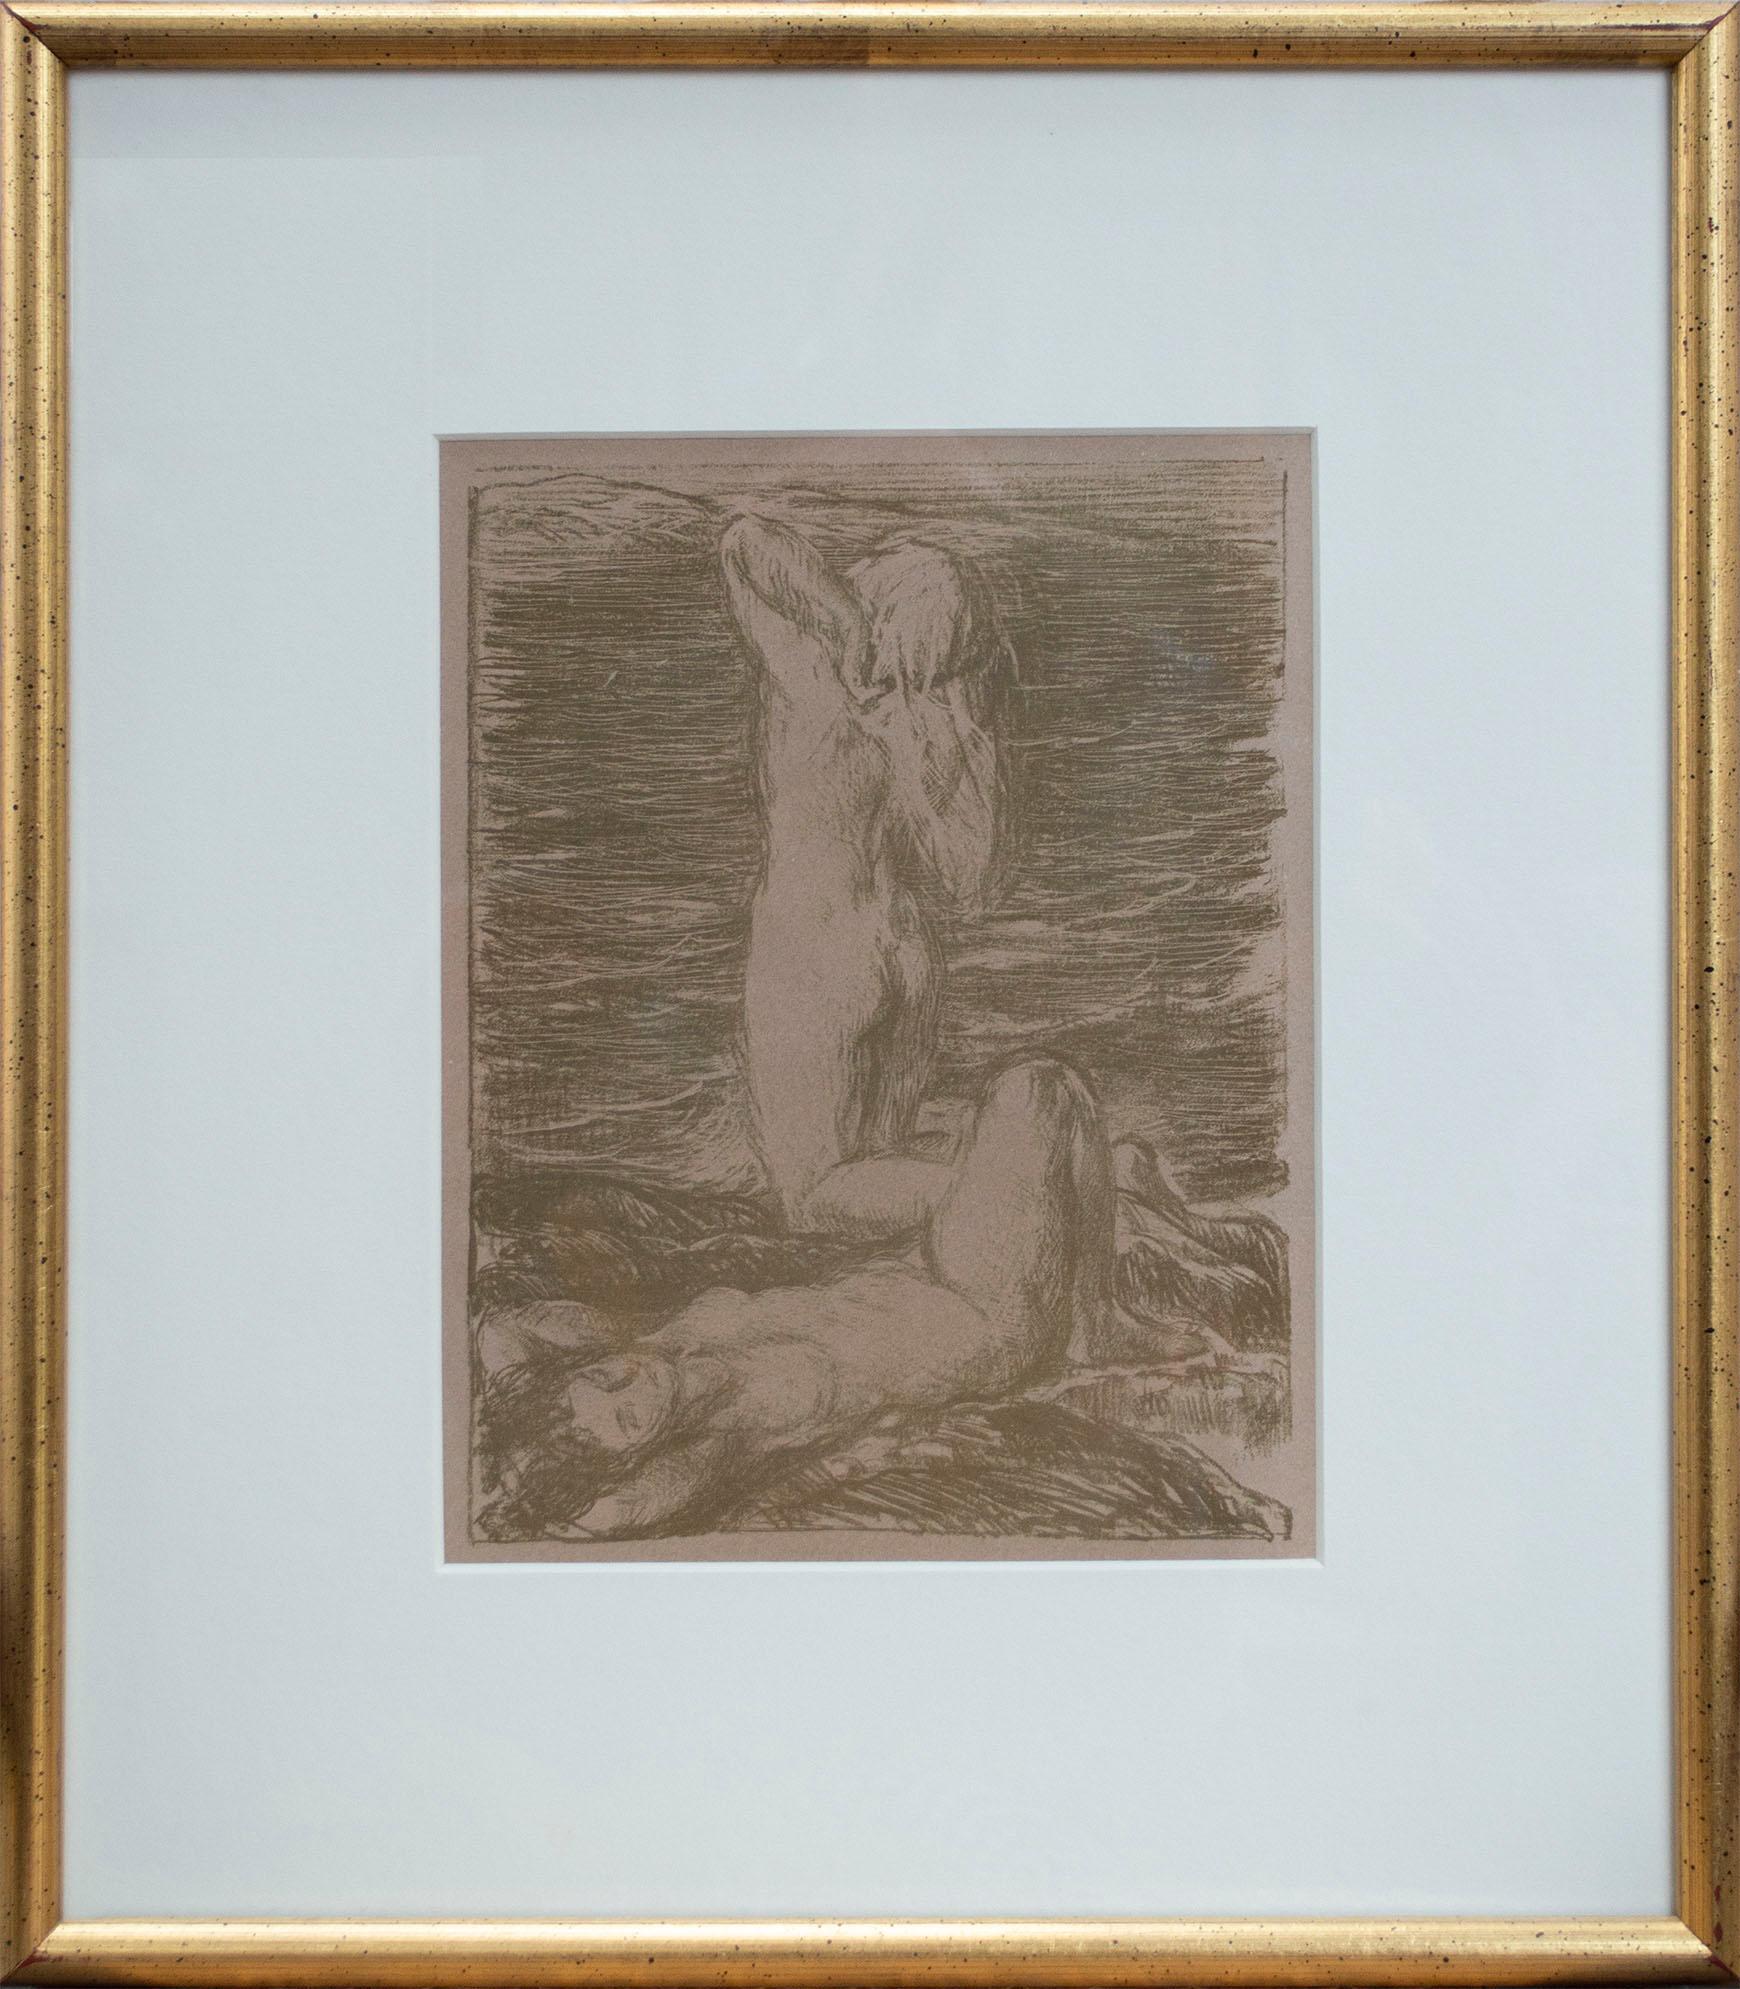 Charles Shannon Figurative Print - 'Two Nudes at the Beach' Original Lithograph in Sepia